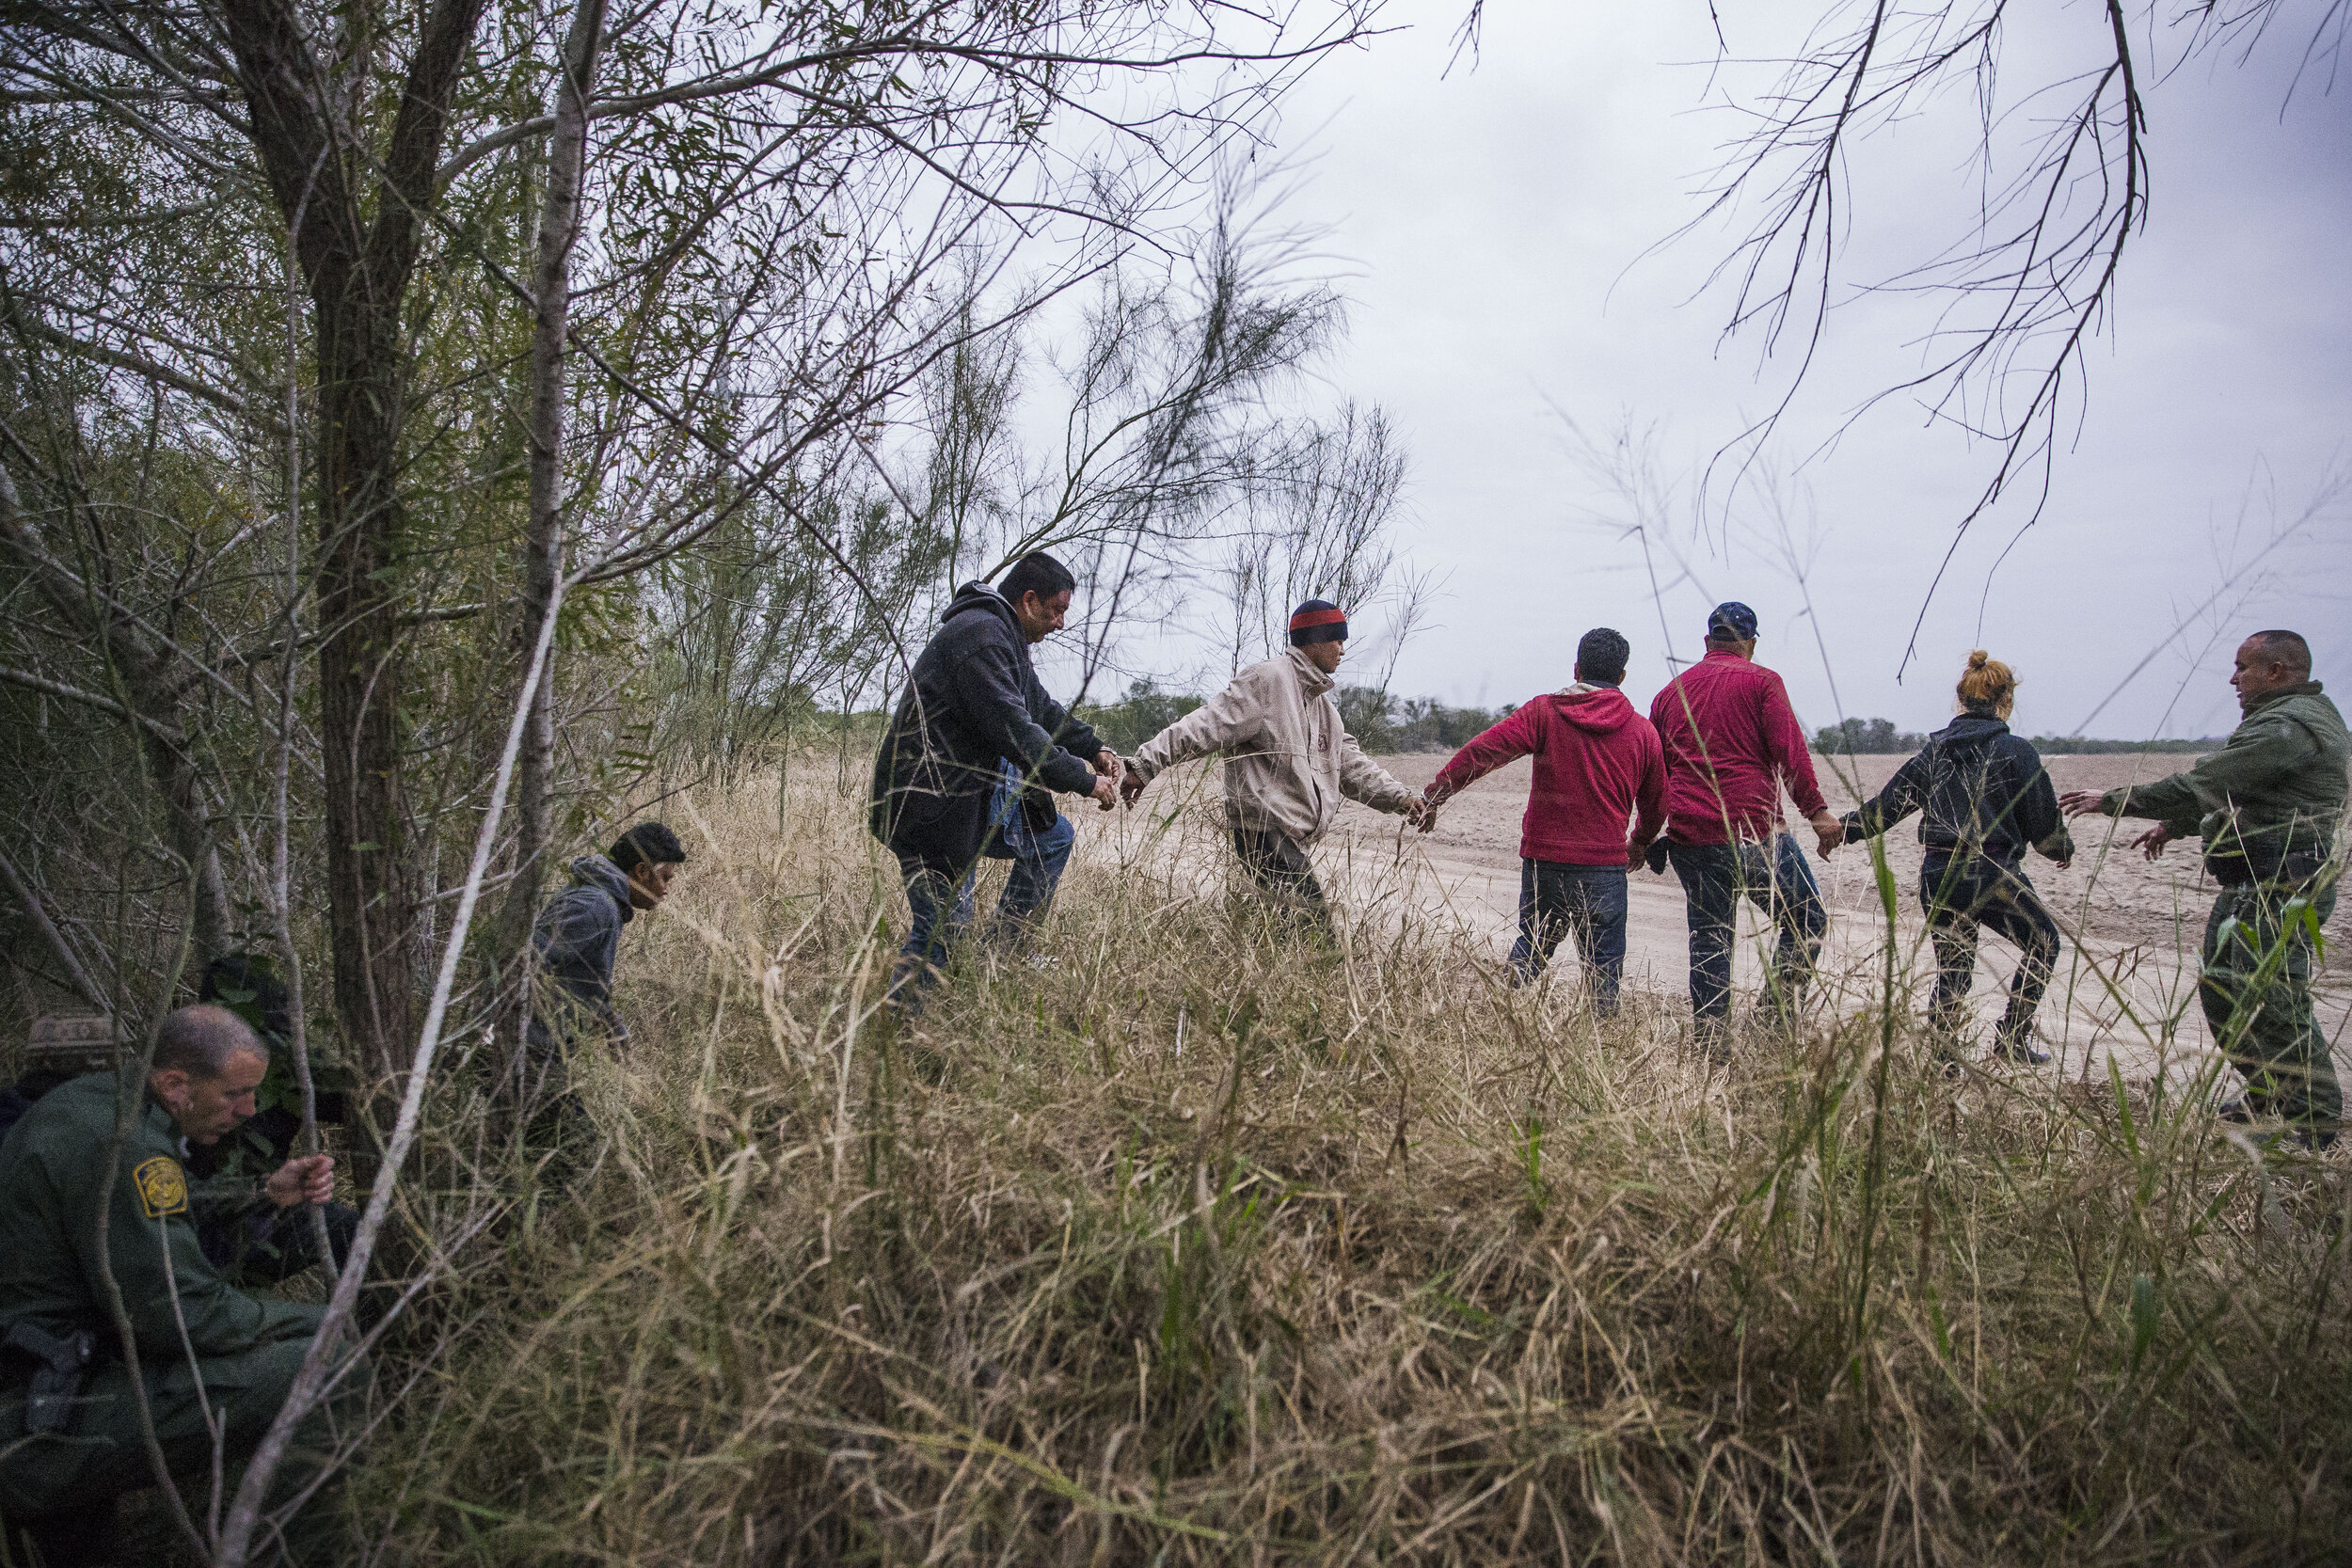  Border Patrol Agents lead a group of immigrants out of the brush after they were apprehended crossing the border from Mexico into the U.S. on Wednesday, Dec. 5, 2018, near McAllen, TX. 